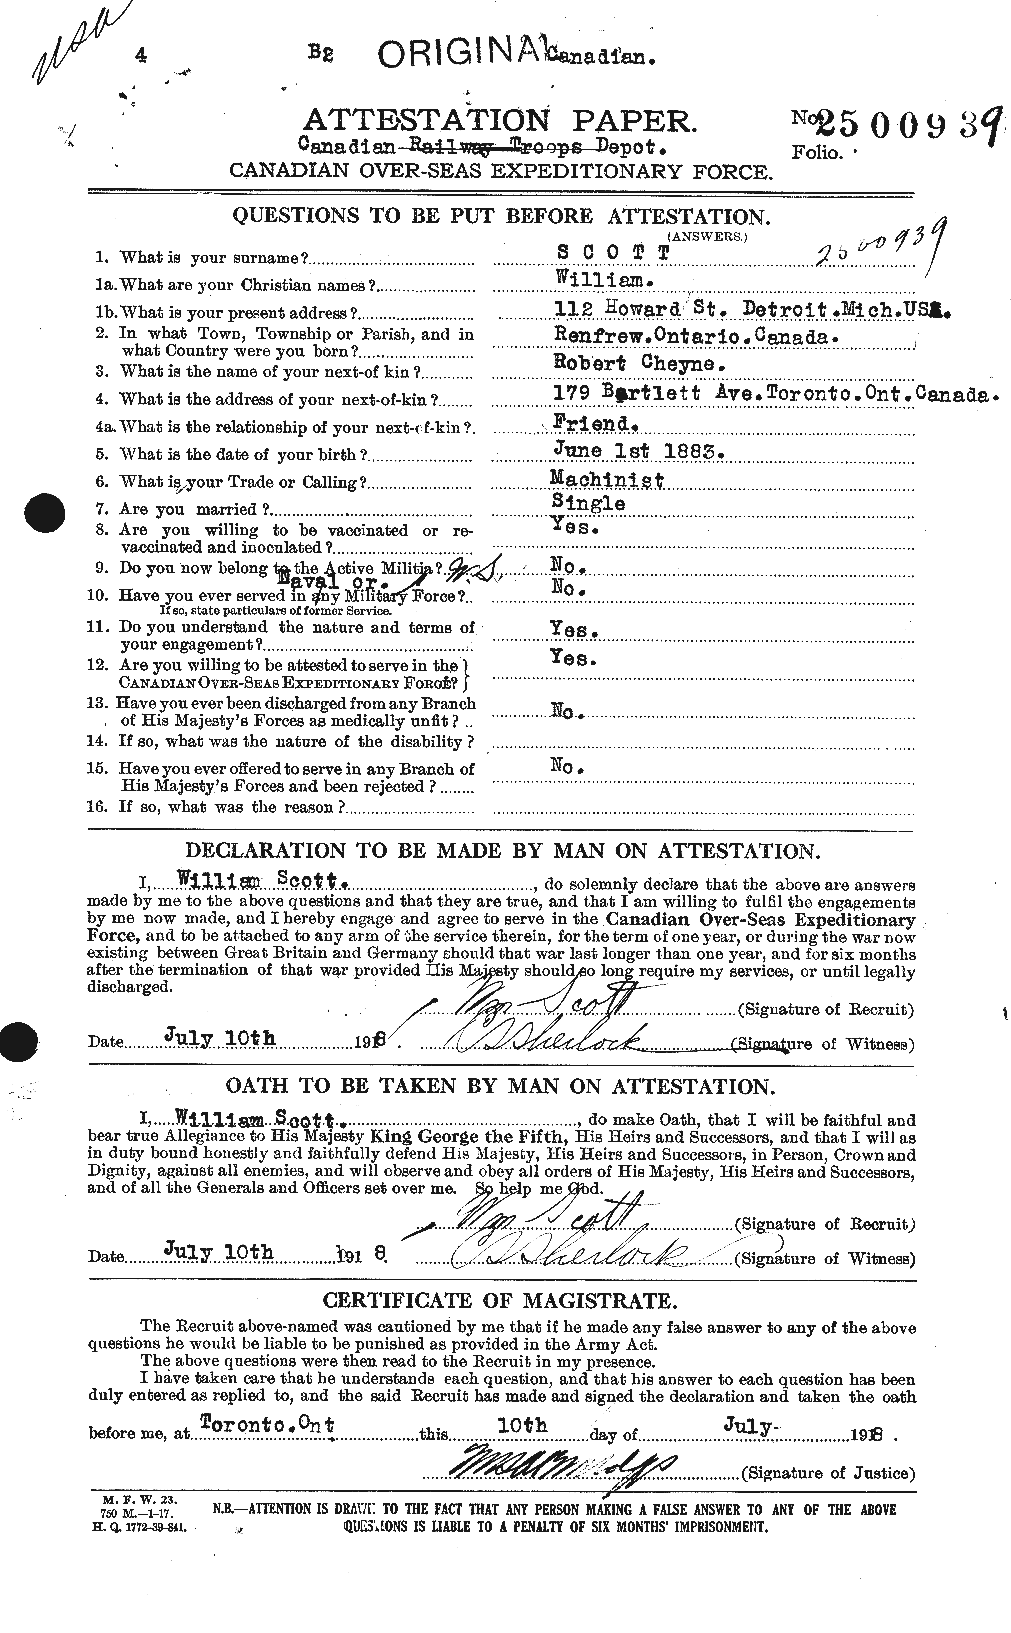 Personnel Records of the First World War - CEF 087653a